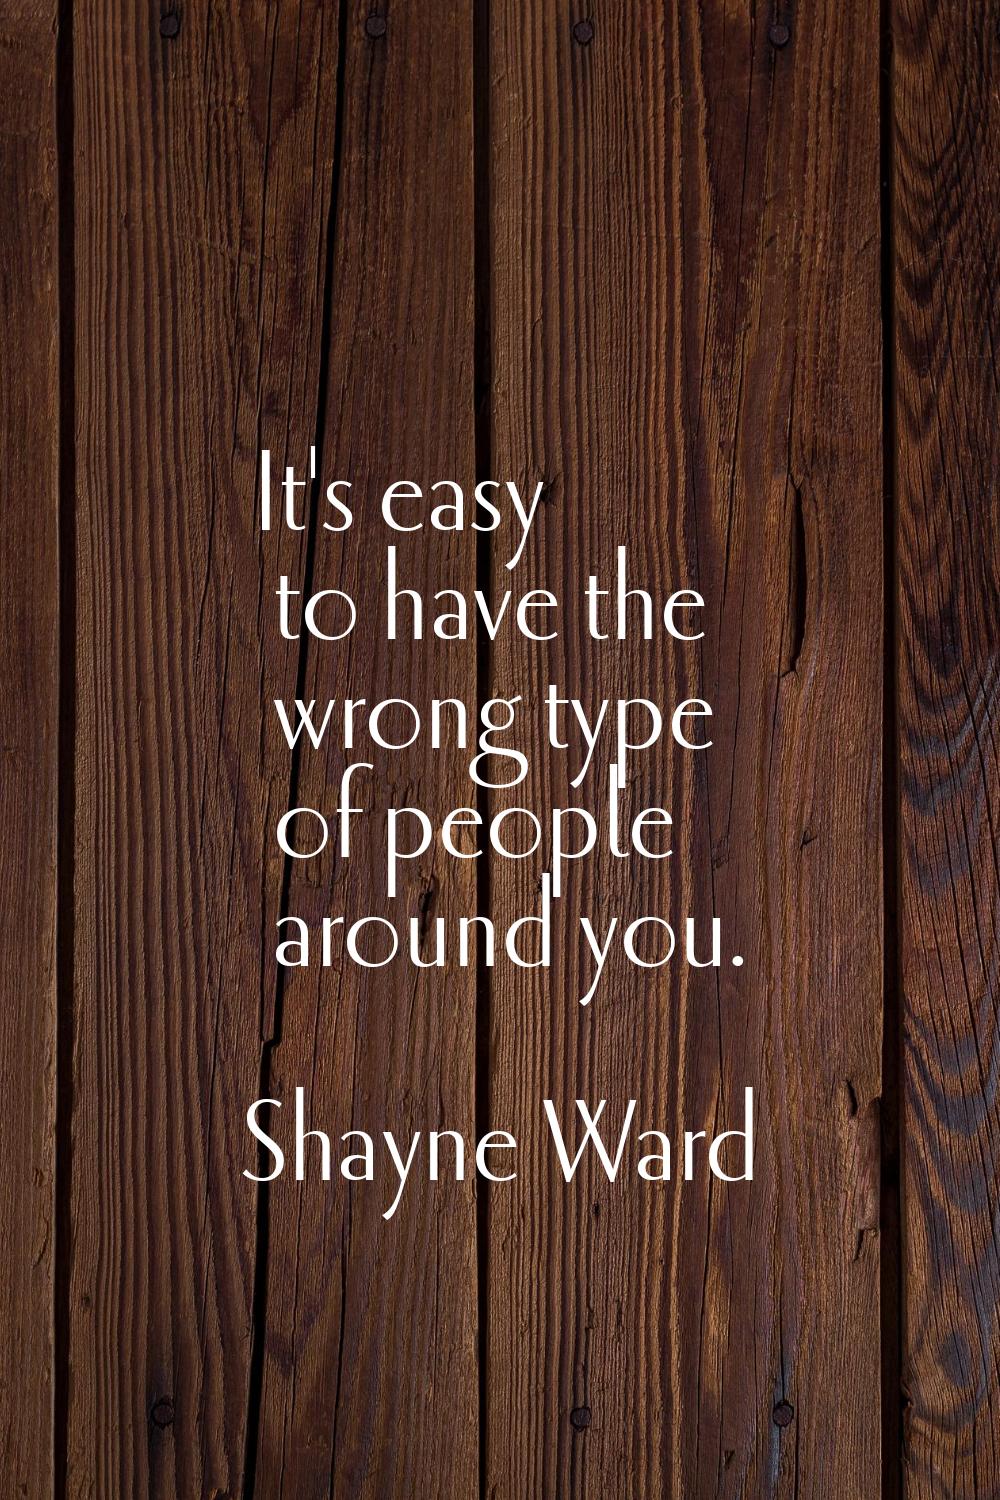 It's easy to have the wrong type of people around you.